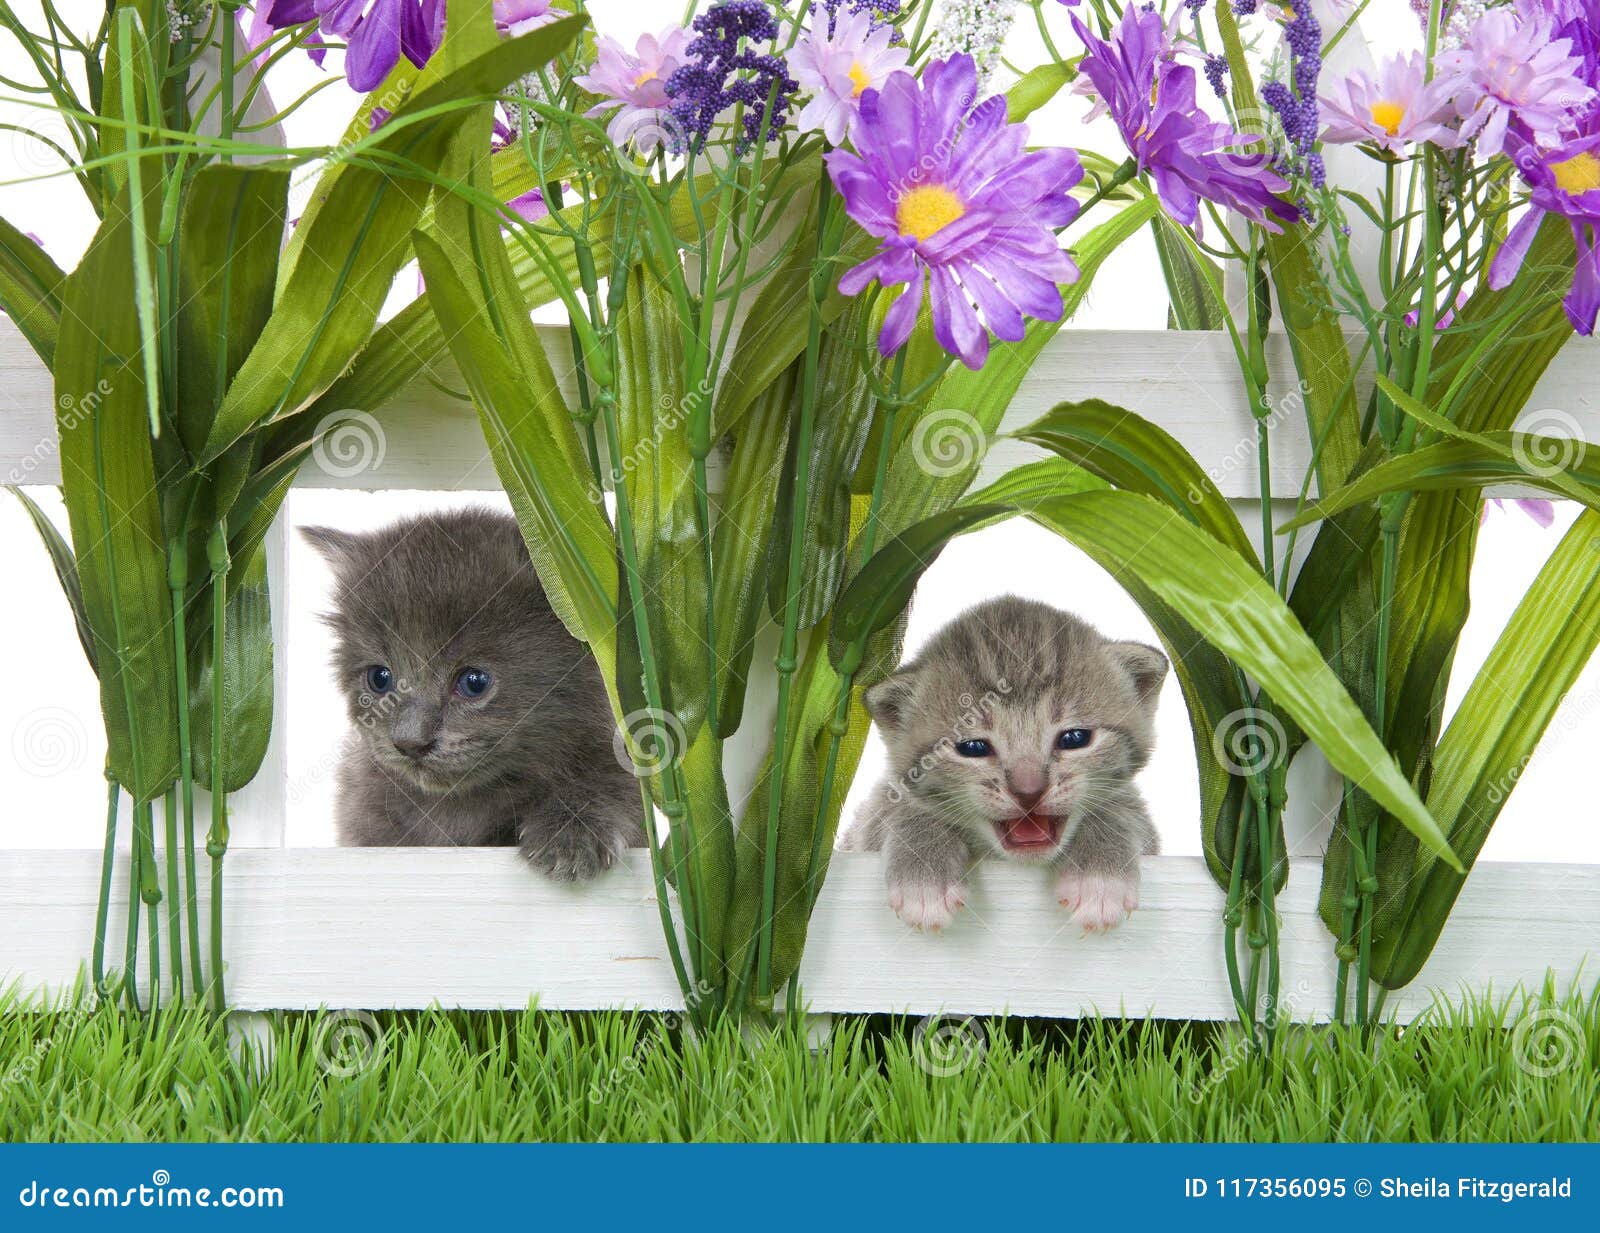 two kittens peaking through a white picket fence in a flower garden